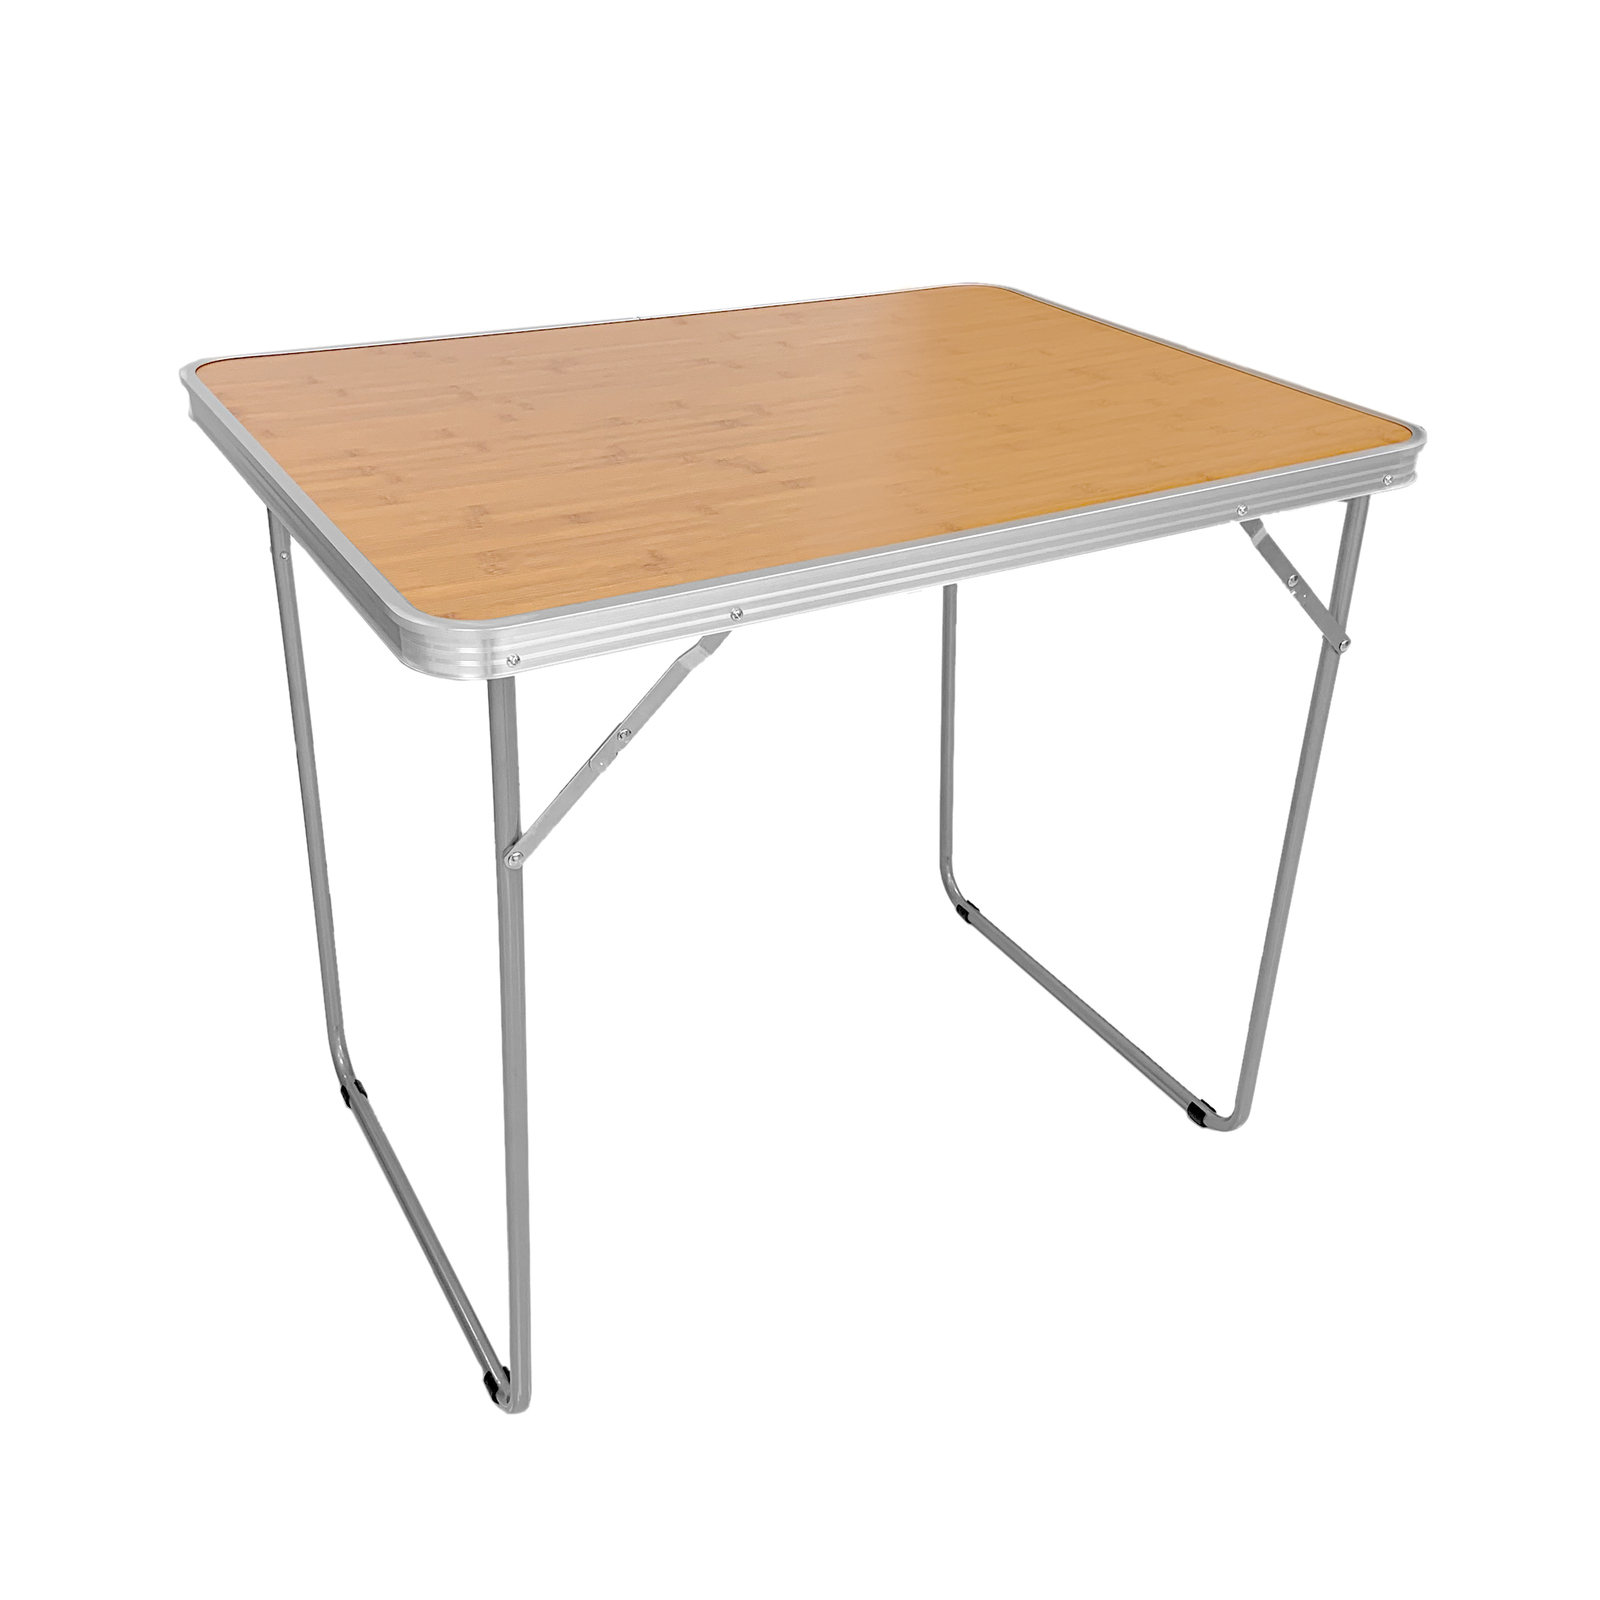 Portable Banquet Folding Table Tray: Modern BBQ Mini Table for Indoor/Outdoor - $39.99